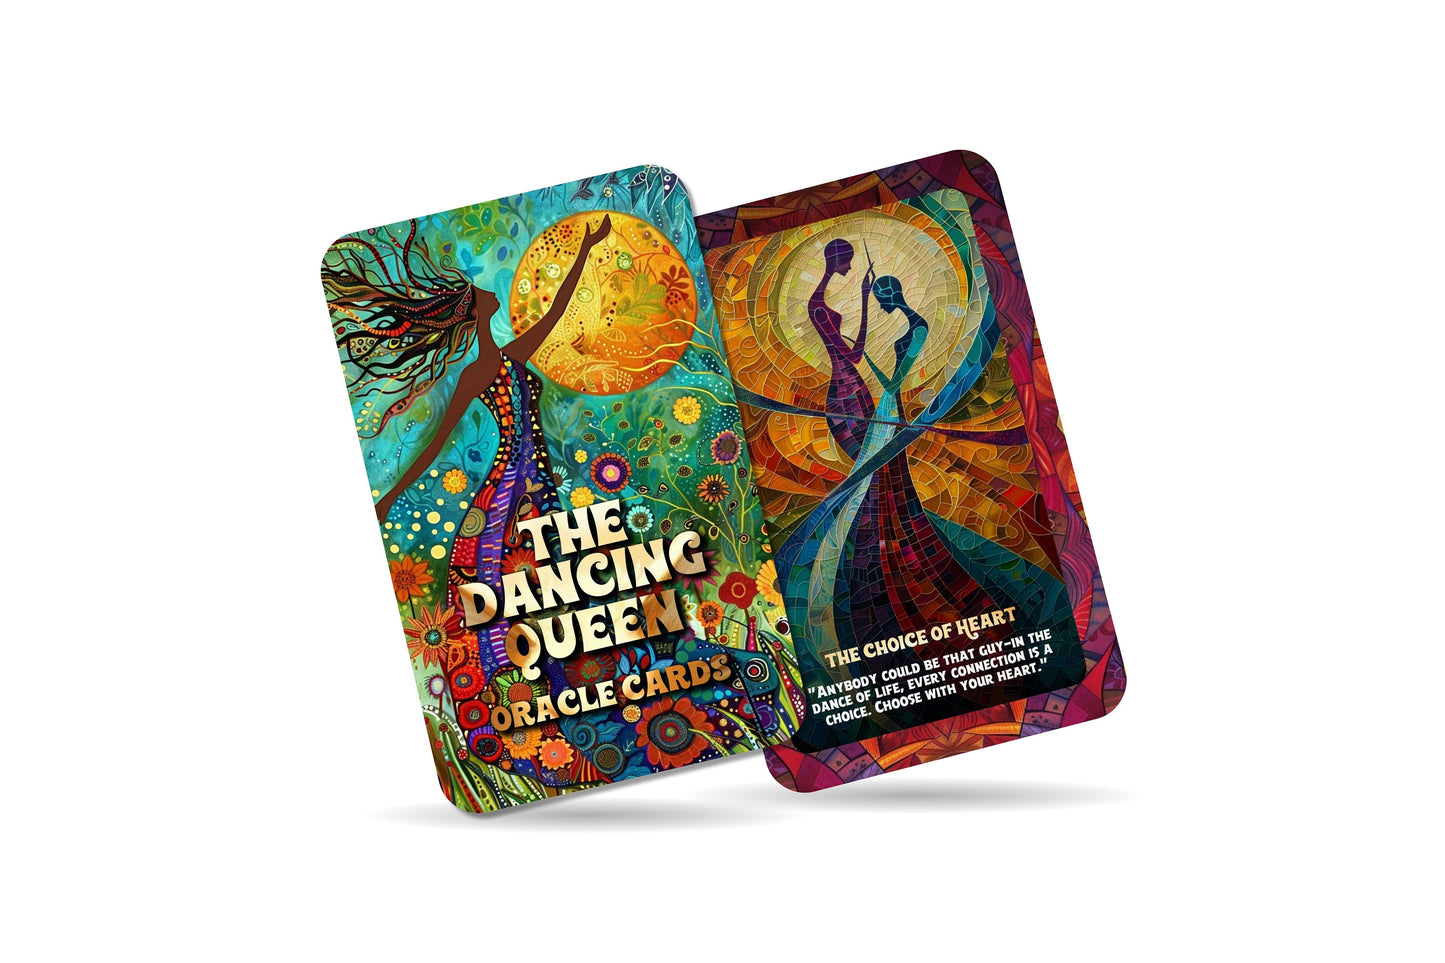 The Dancing Queen Oracle Cards - A Journey Through Song and Spirit